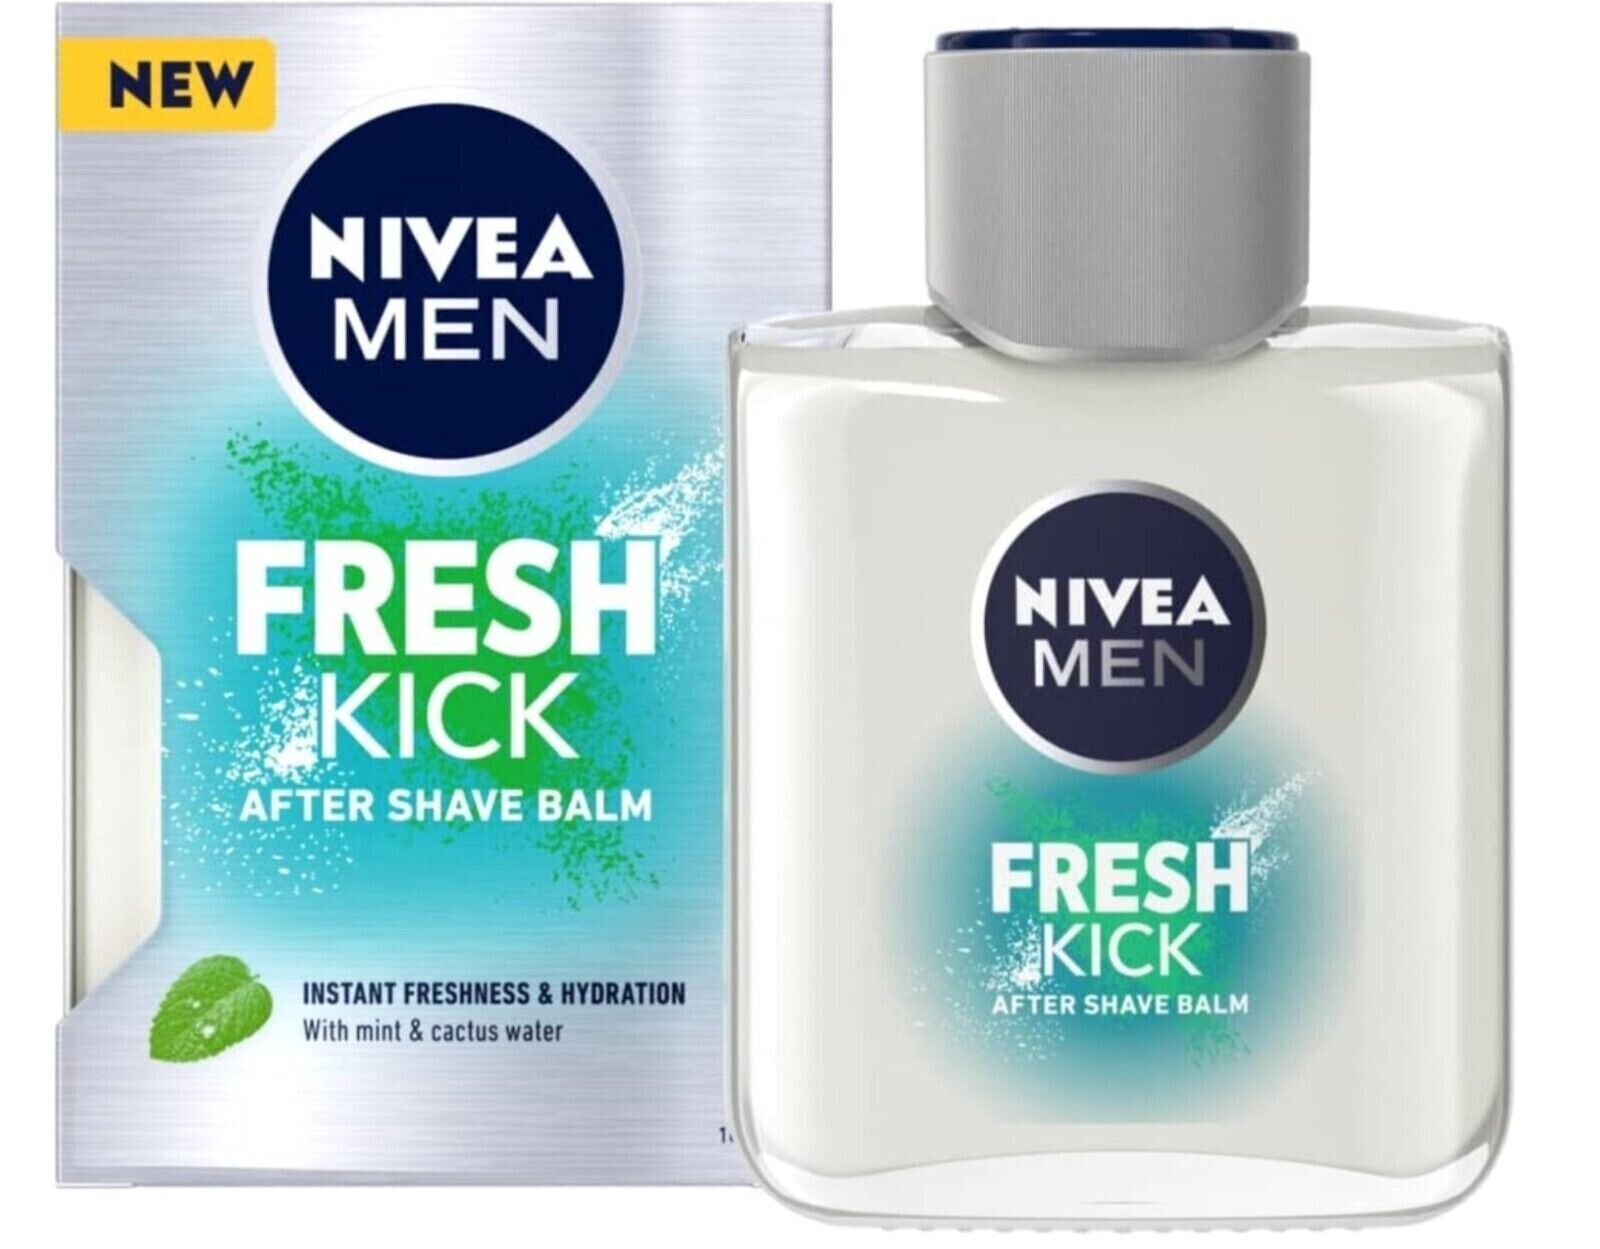 NIVEA MEN Fresh Kick After Shave Balm (100ml) with Mint and Cactus Water